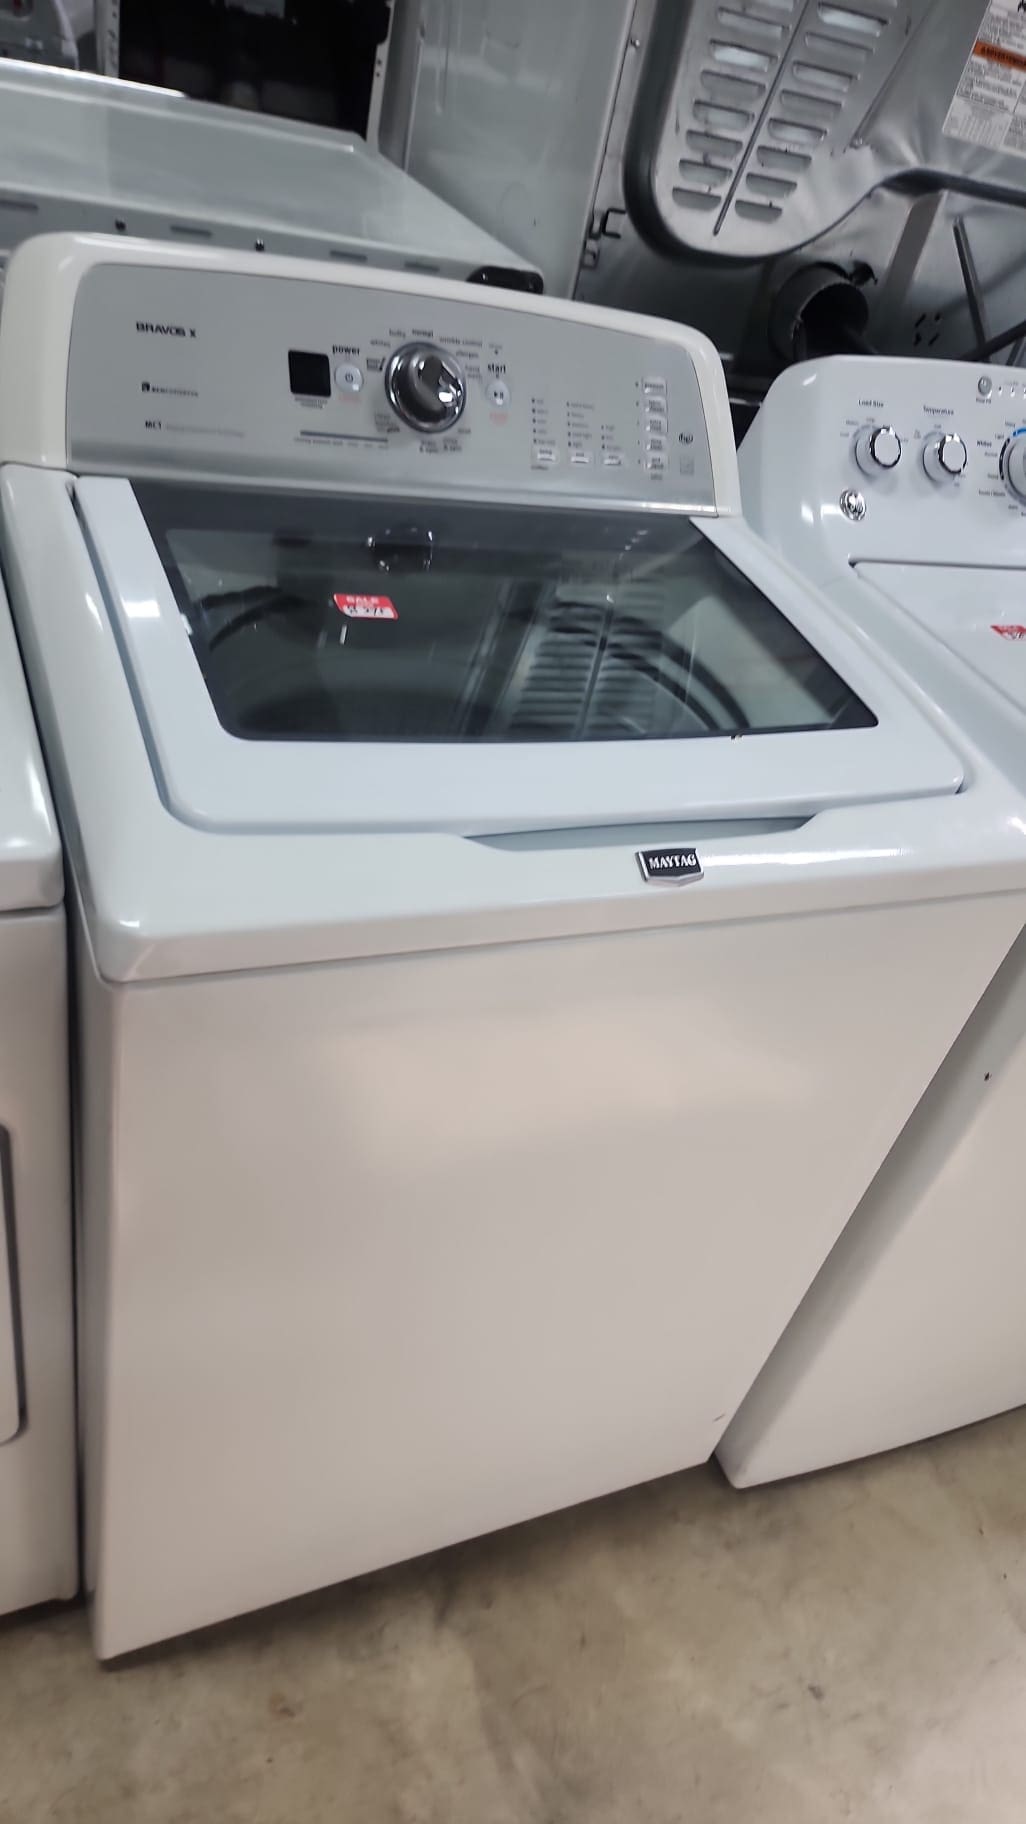 Maytag Top Load Washer – White